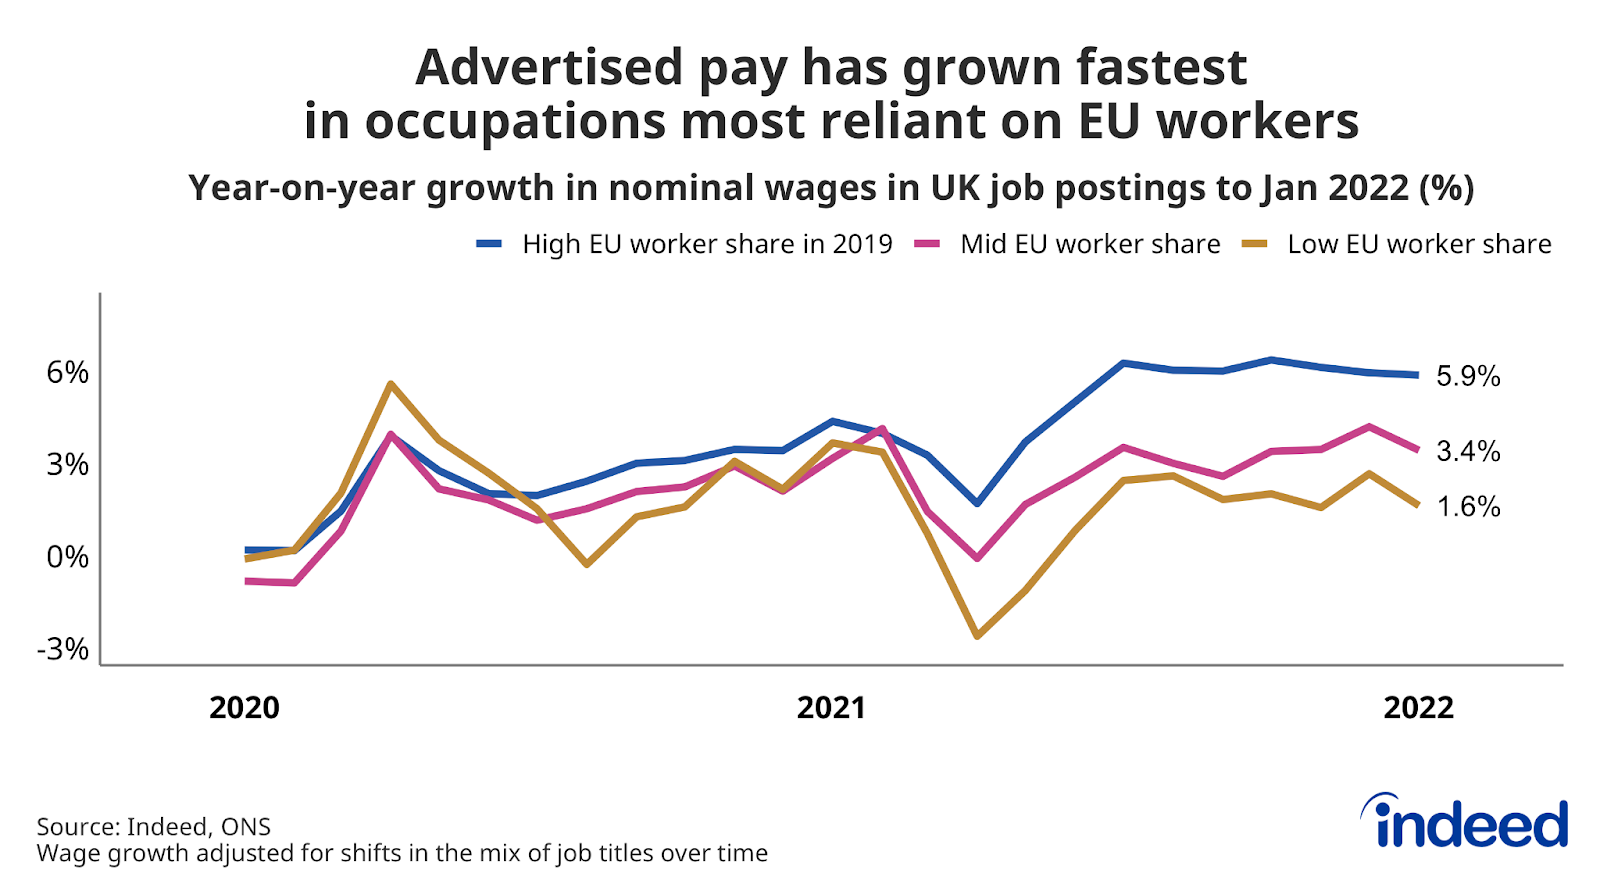 Line graph titled “Advertised pay has grown fastest in occupations most reliant on EU workers.”